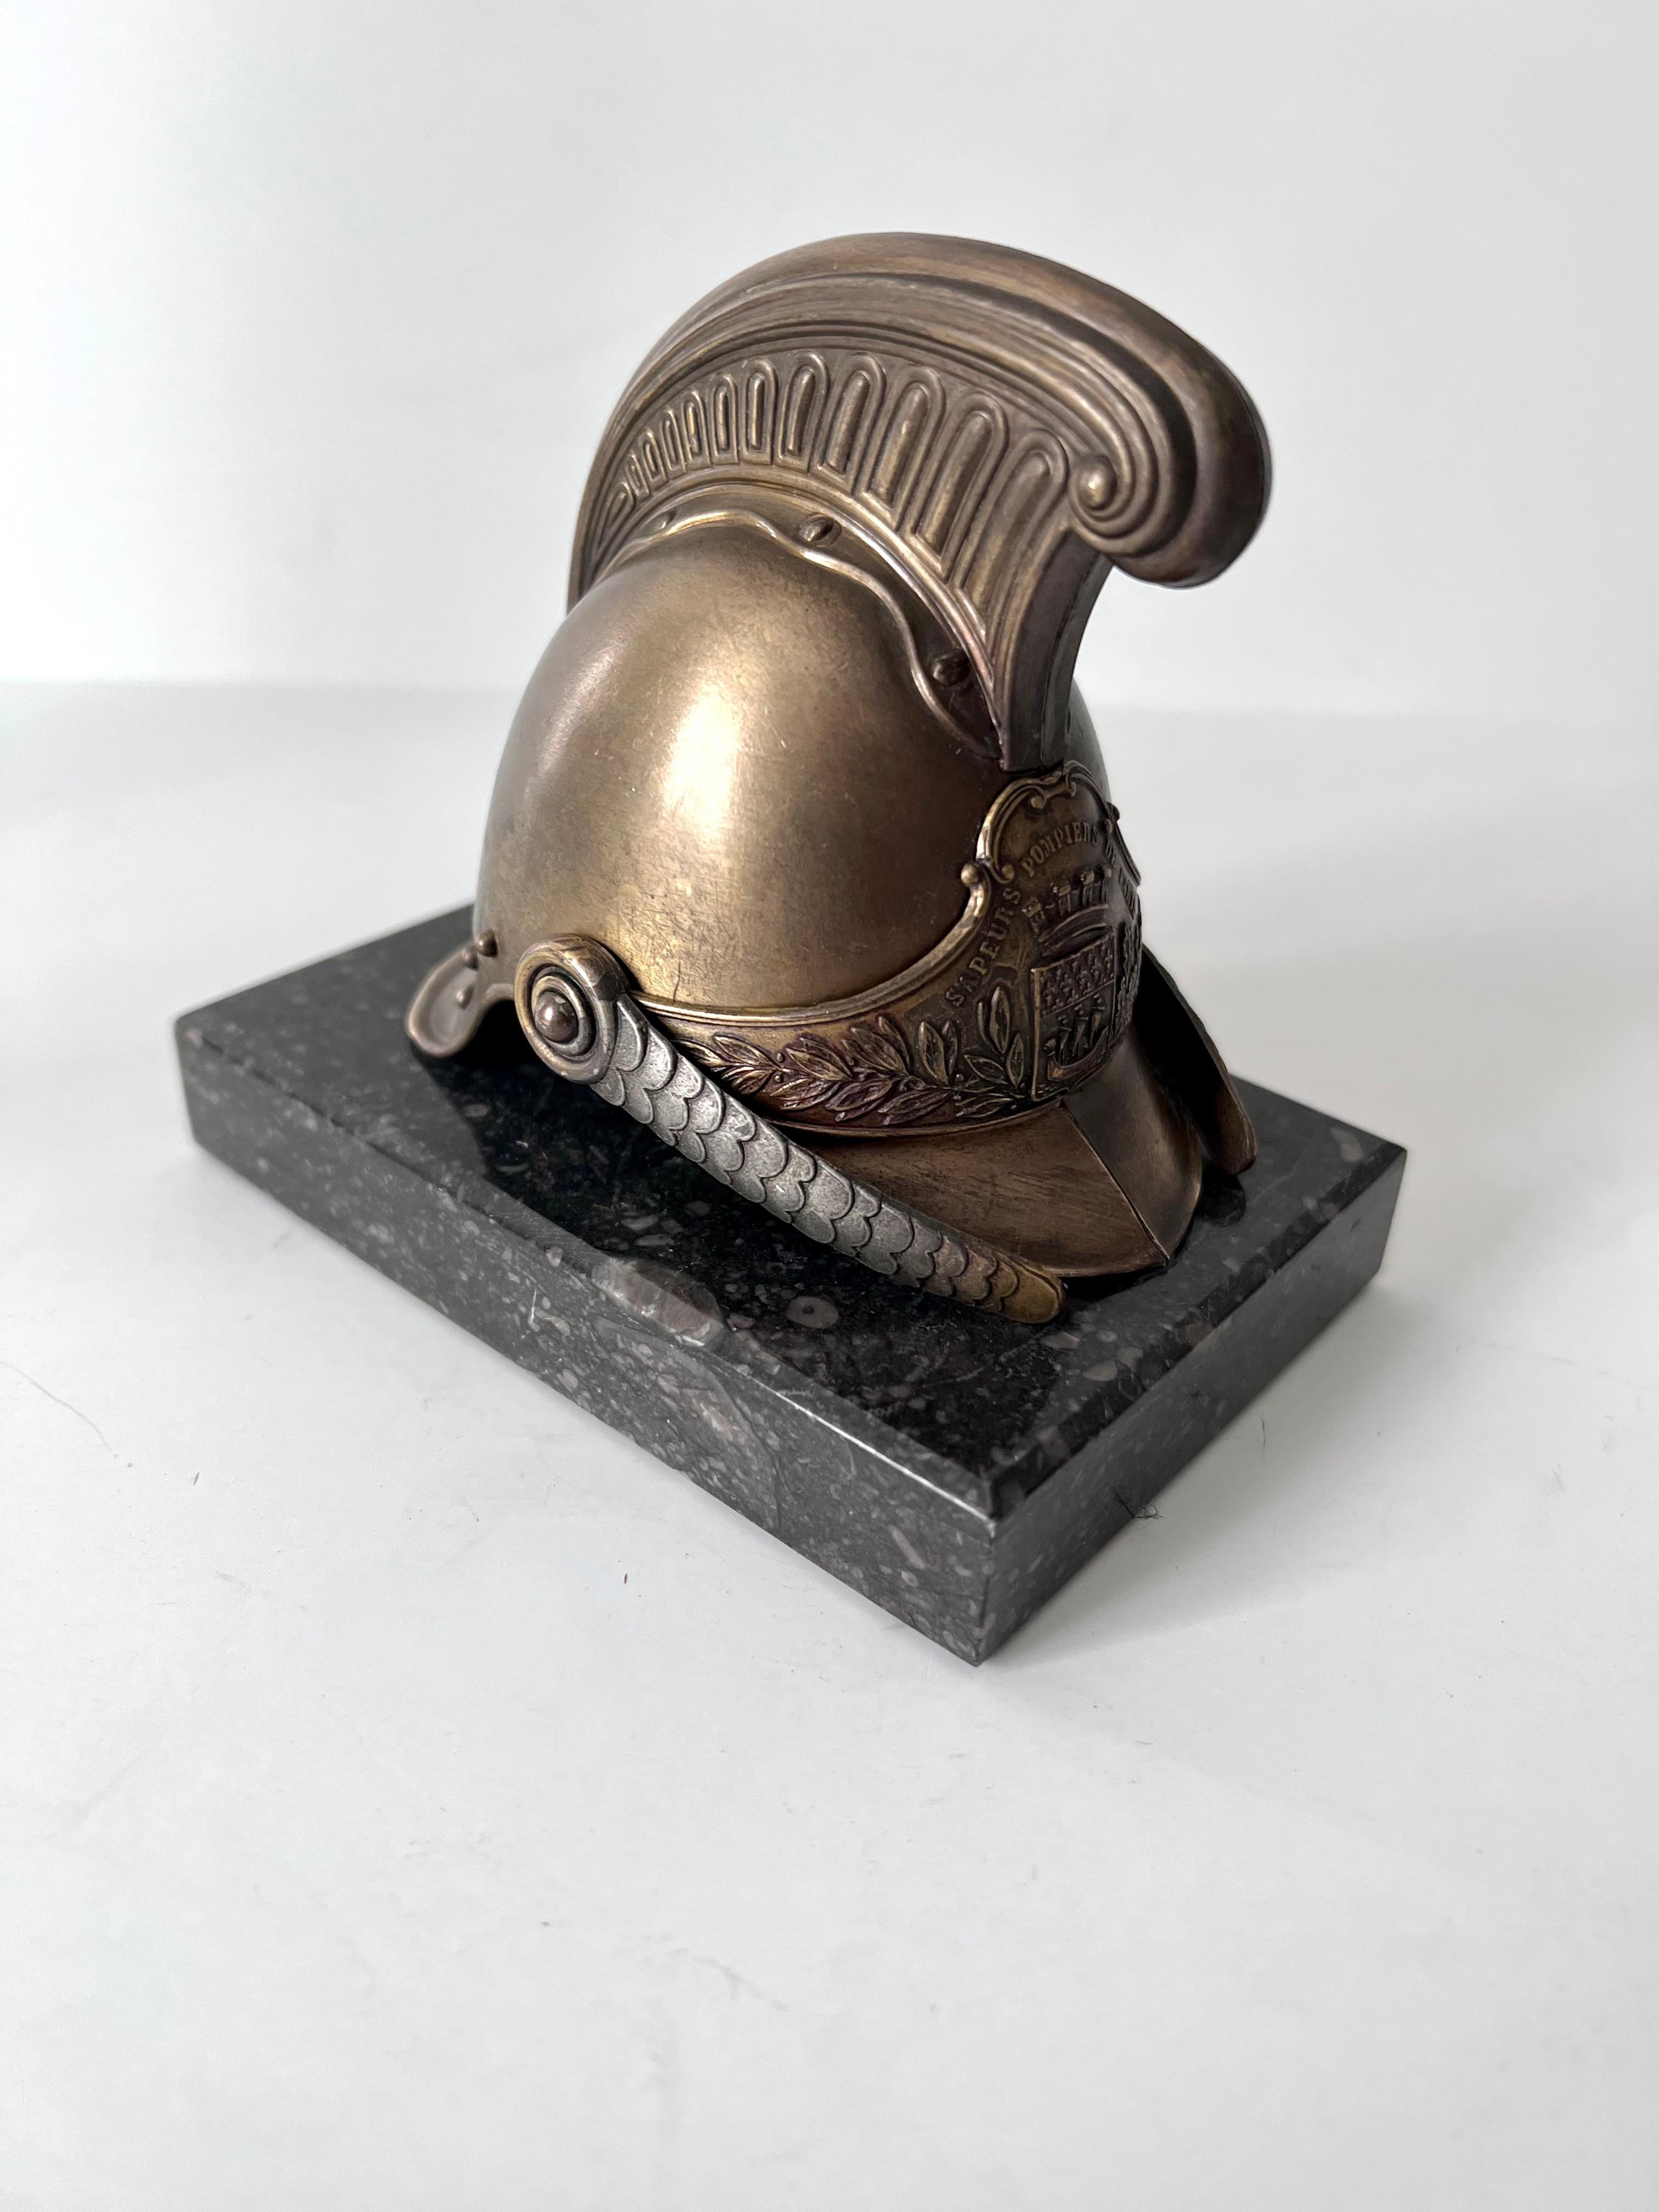 Acquired in Paris France, this is a wonderful paperweight. A Helmut mounted on a piece of marble - a compliment to any desk or work station. The helmet is metal and the sides move a bit, as they are supposed to. A great curiosity, wonderful for a